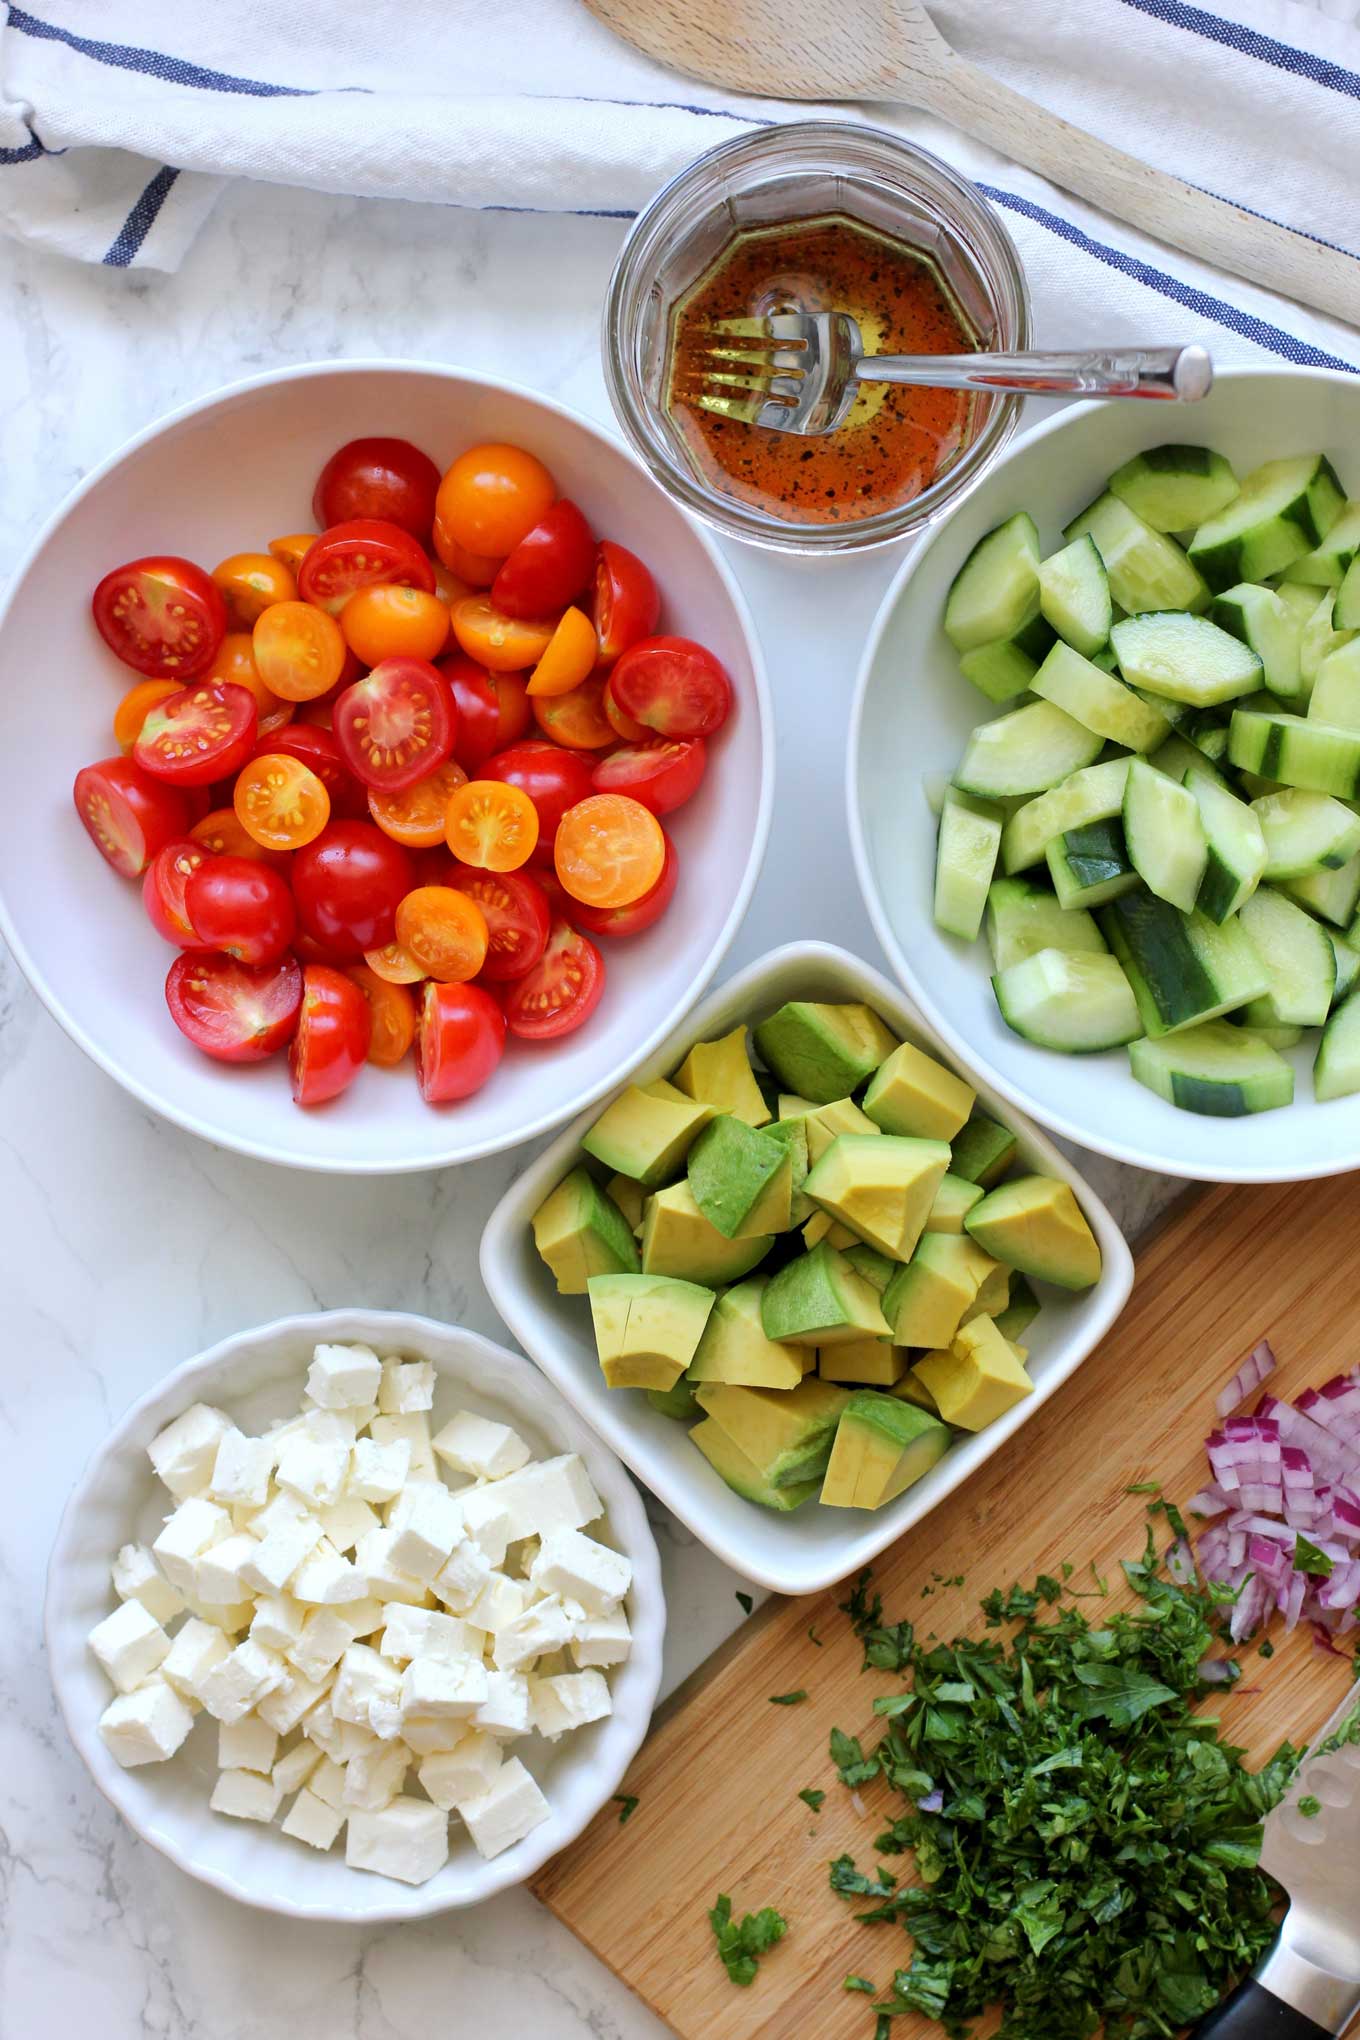 Ingredients to make a tomato, cucumber, avocado salad on a marble countertop.